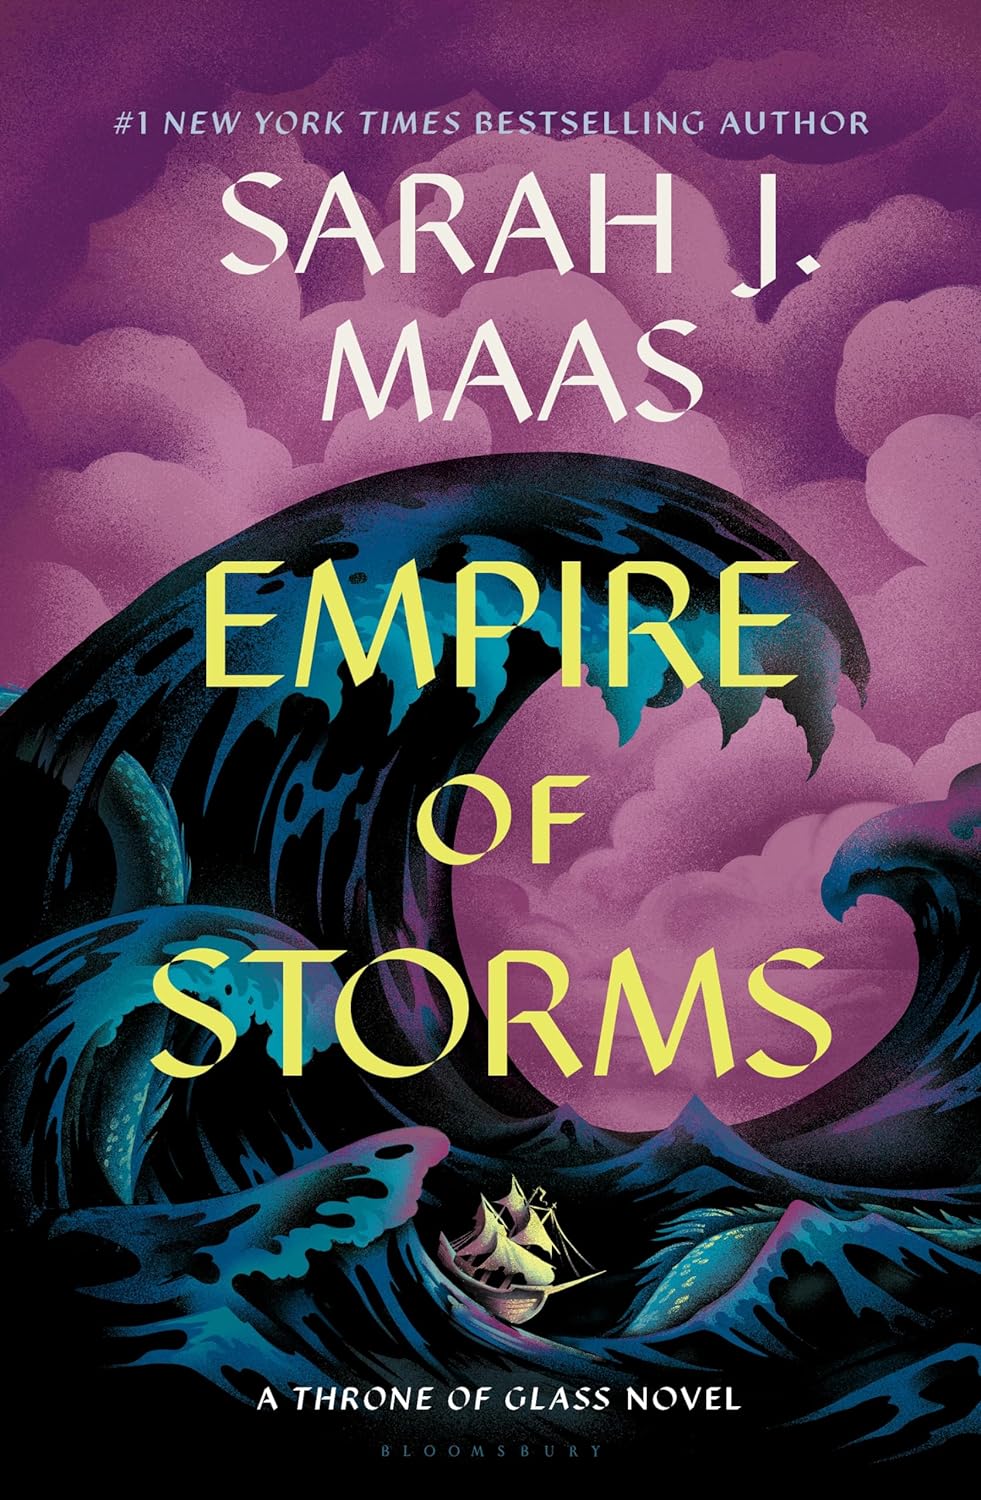 Empire of Storms - by Sarah J. Maas